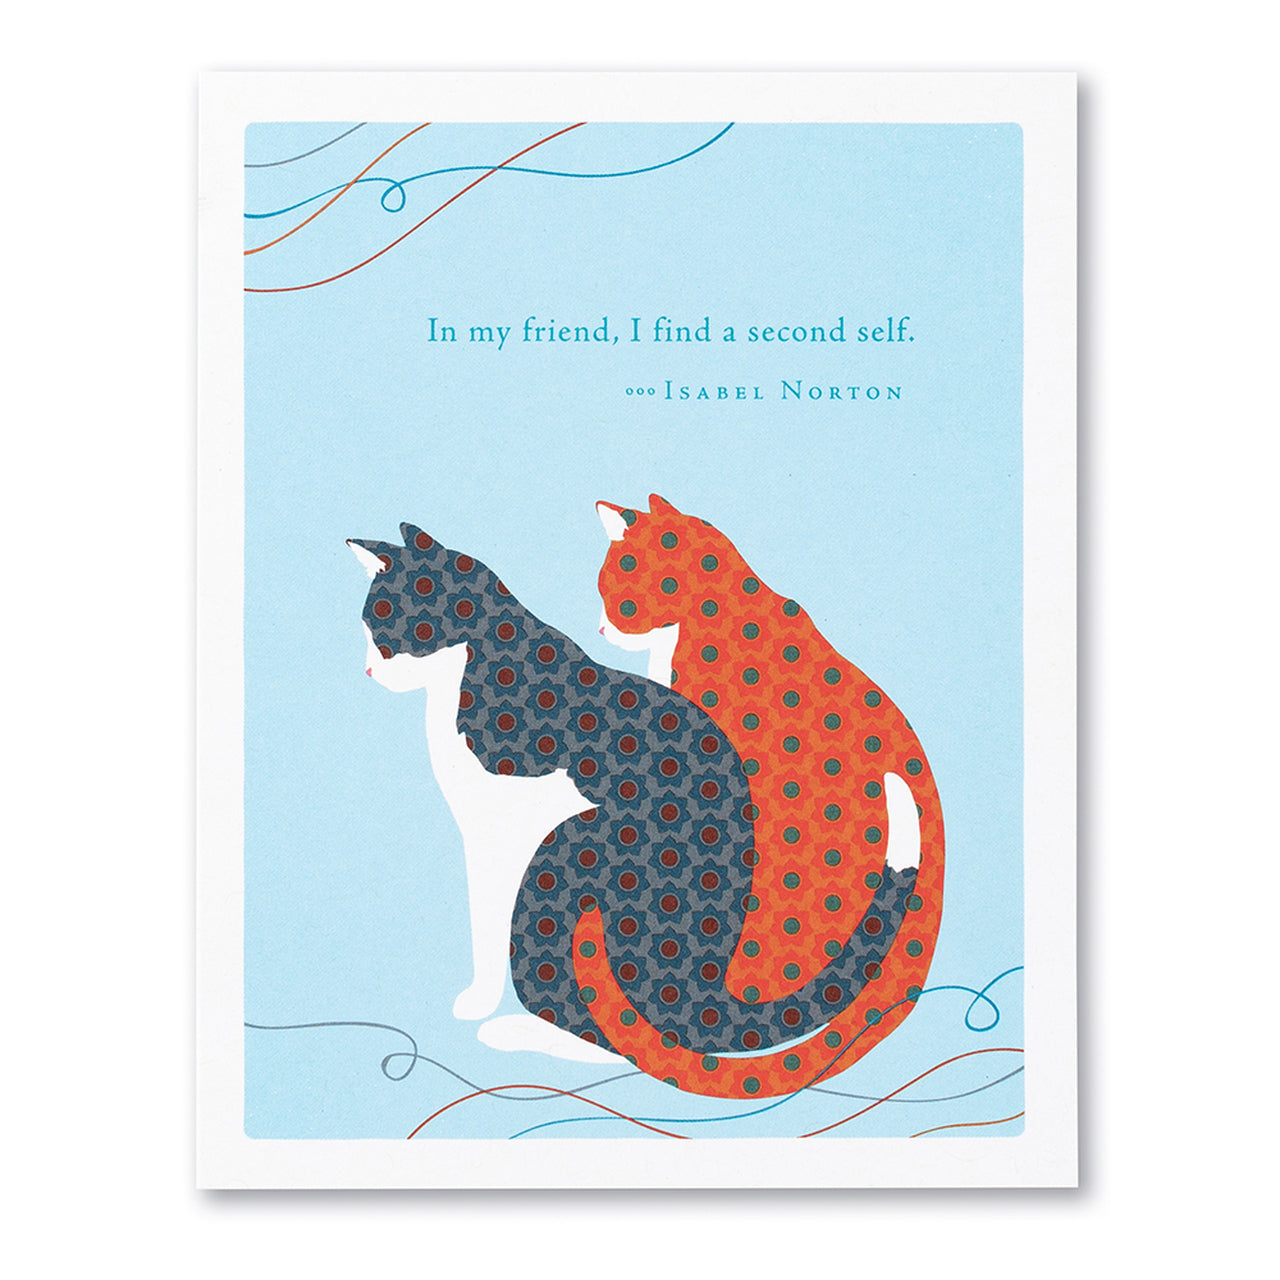 Positively Green Greeting Card - Friendship - "In My Friend, I Find a Second Self" - Isabel Norton - Mellow Monkey